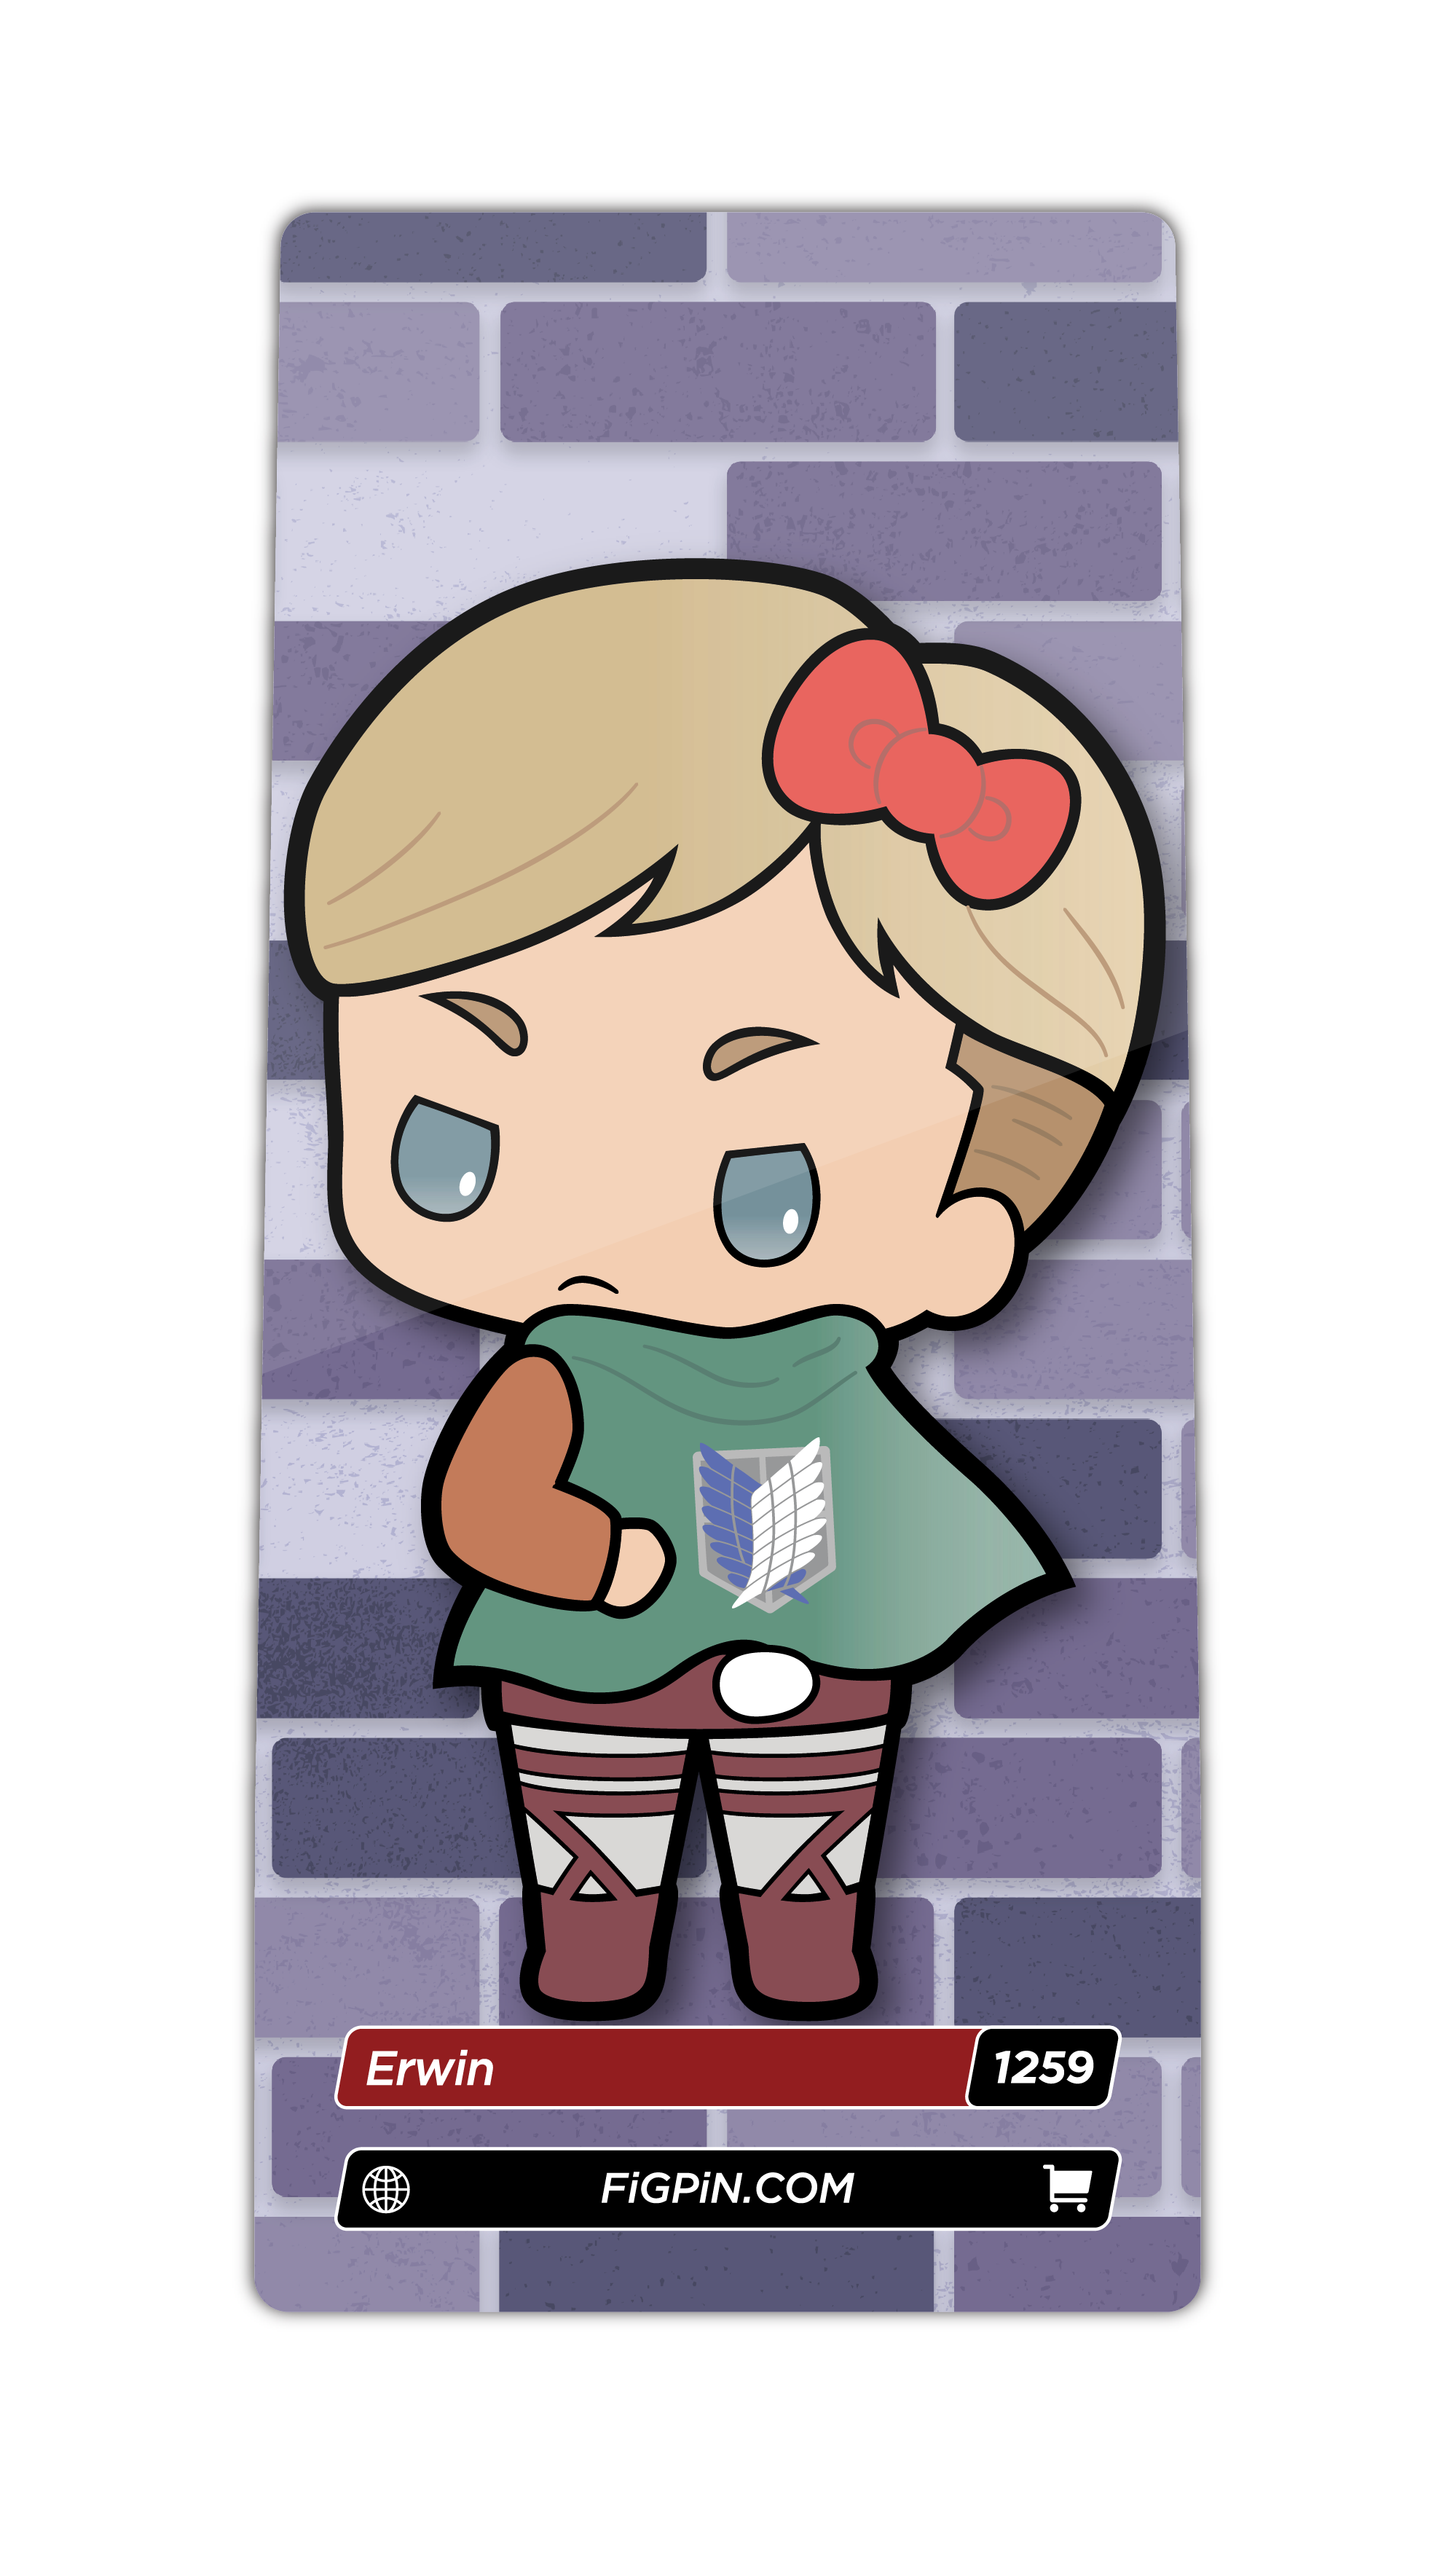 Character card of Attack on Titan's Erwin with text “Erwin (1259)” and link to FiGPiN’s website